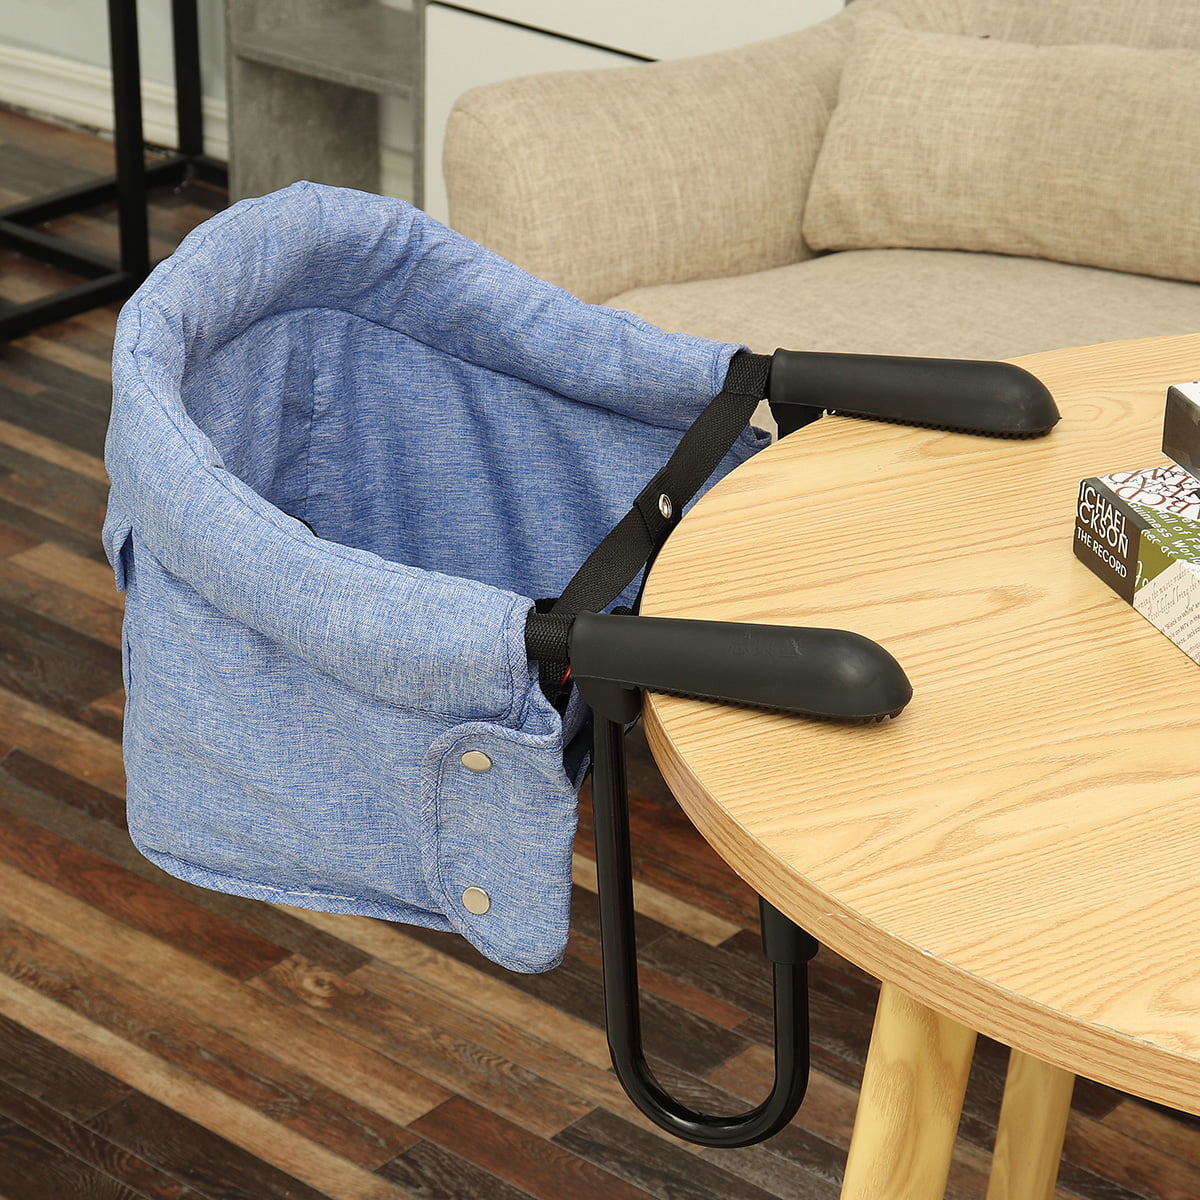 Hook On Chair Attach to Fast Table Chair Navy Blue High Load Design Fold-Flat Storage Portable Feeding Seat Clip on High Chair 